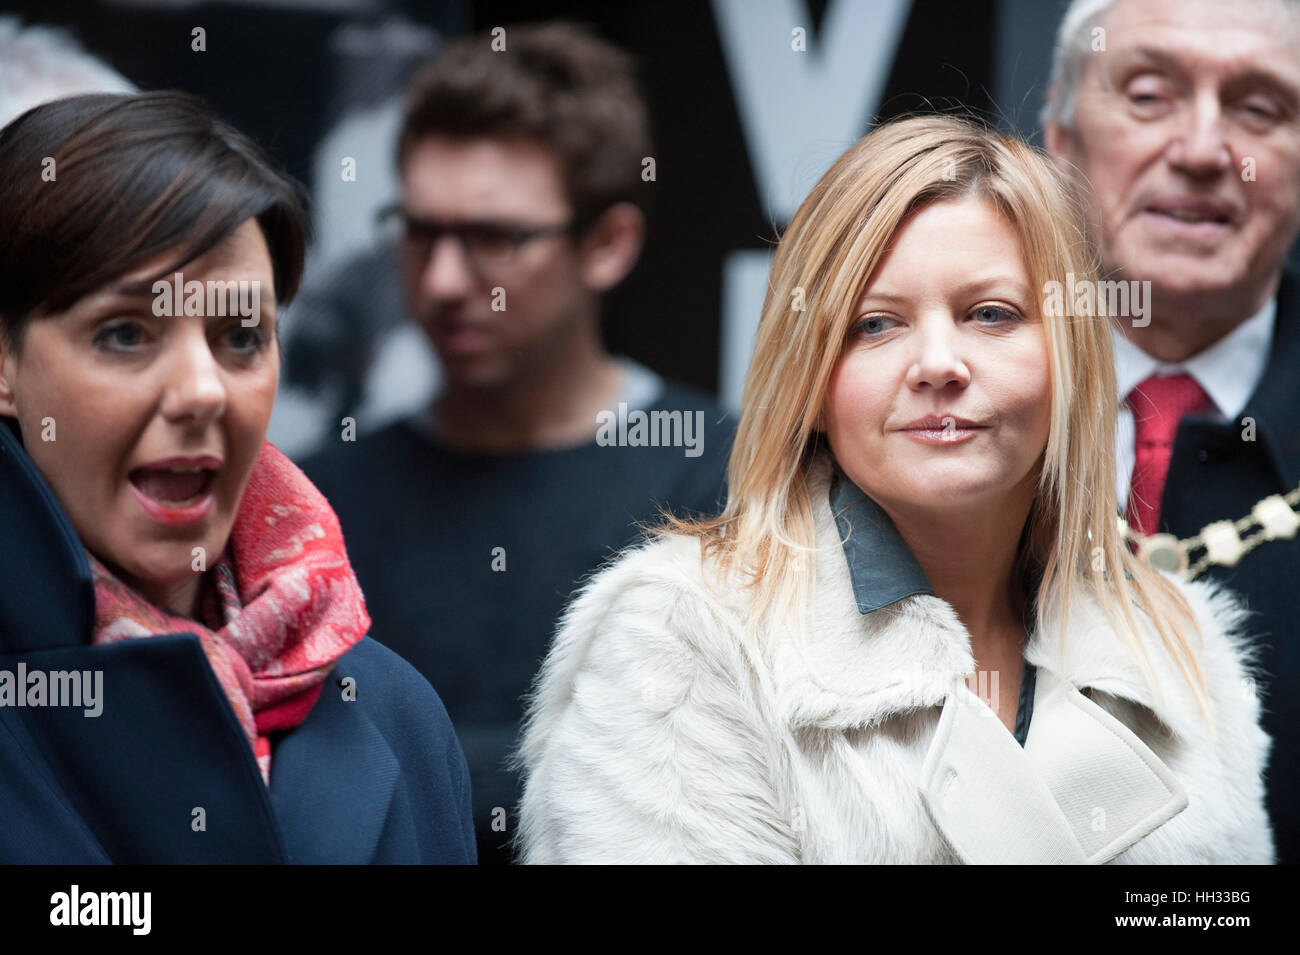 Liverpool, UK. 16th January 2017. Artist, Emma Rodgers, and Angela Samata, Merseyside Woman of the year 2015, attend the unveiling of a bronze sculpture she created of Liverpool born singer and TV star, Cilla Black, outside the Cavern Club in Matthew Street, Liverpool.  Coinciding with the 60th birthday of The Cavern Club, the statue was commissioned by her three sons, Robert, Ben and Jack Willis, and created by artists Emma Rodgers and Andy Edwards, the statue has been gifted to the City of Liverpool. © Paul Warburton Stock Photo